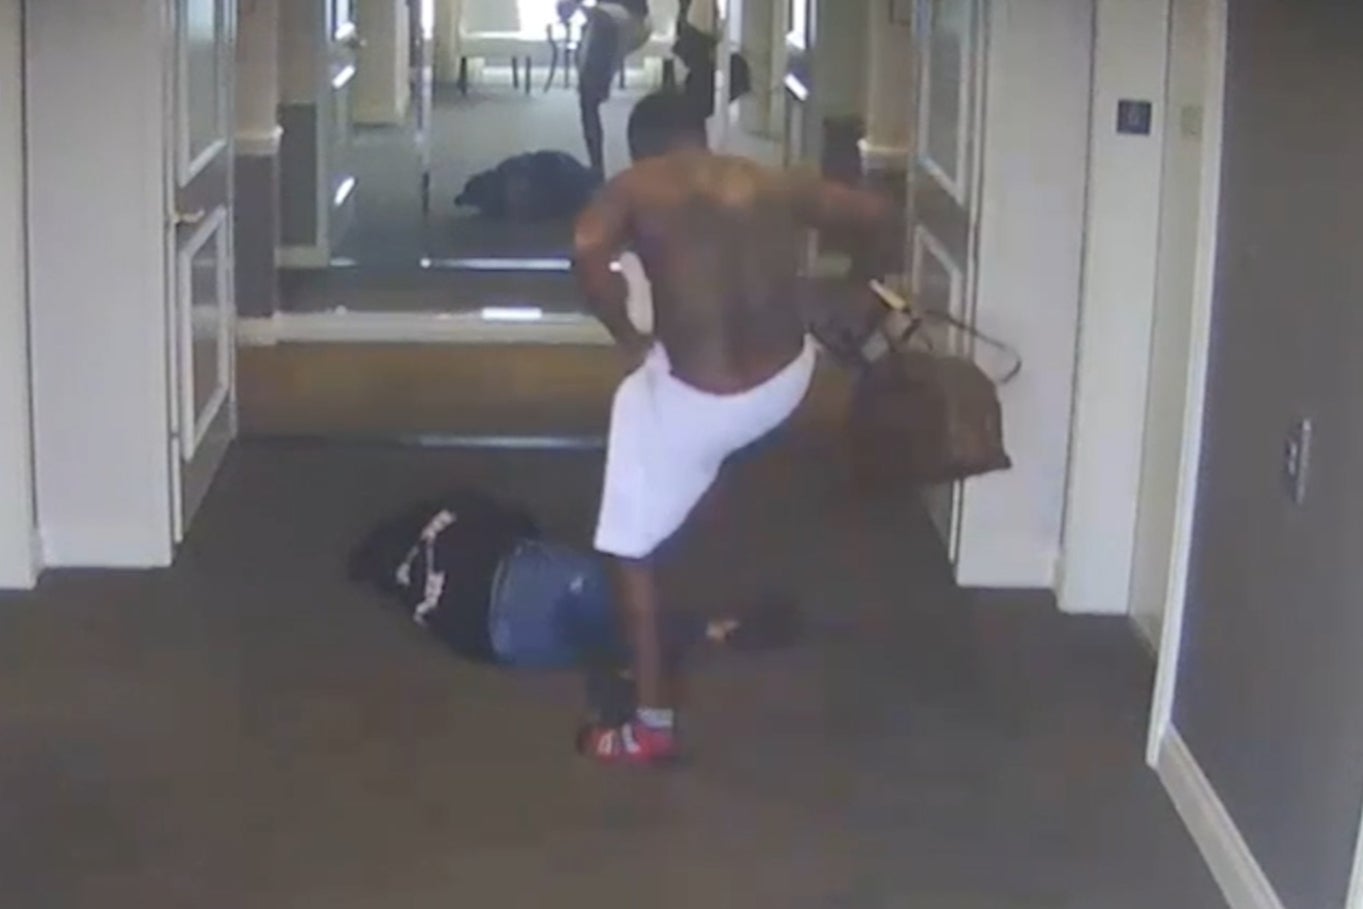 Surveillance footage from a Los Angeles hotel appeared to show the music mogul chasing Cassie down a hotel corridor before brutally attacking her near to a set of elevators